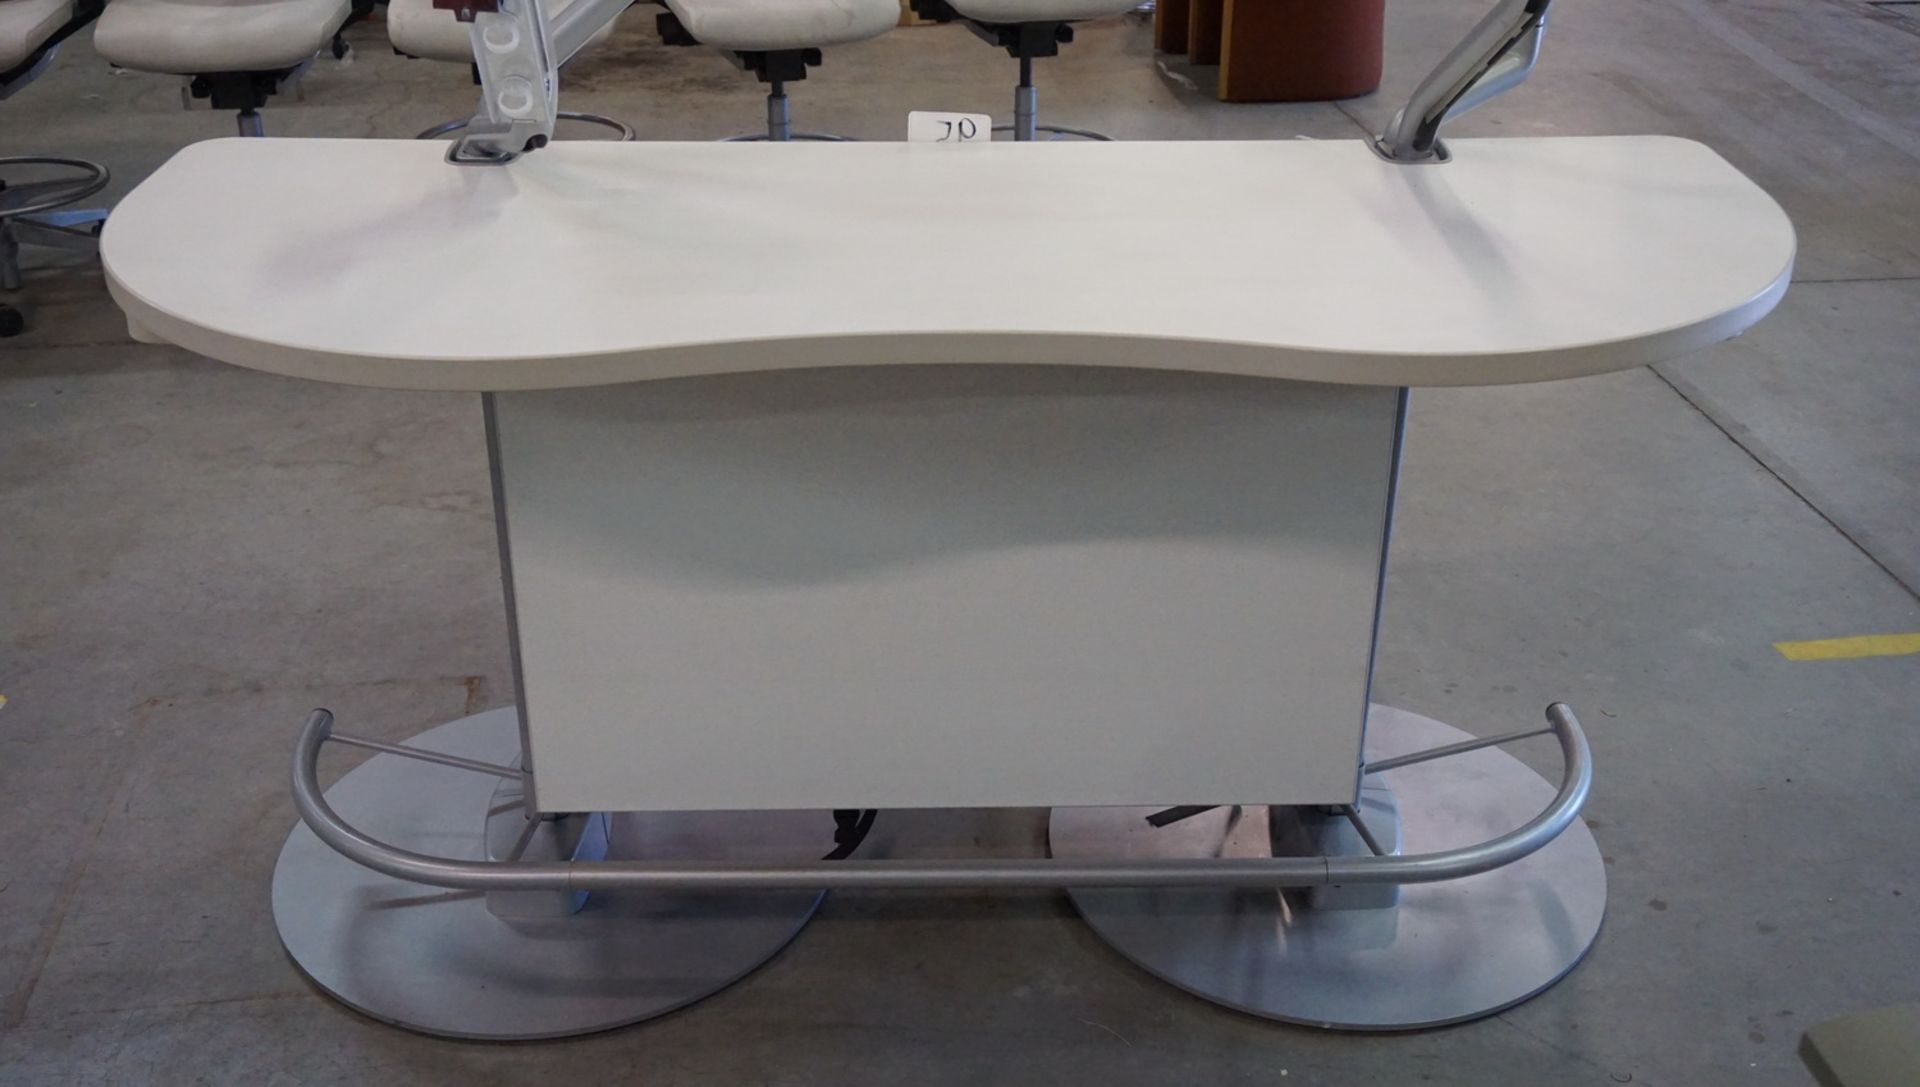 STEELCASE 2-SIDED HOSPITAL / HEALTHCARE WORK TABLE W/ 4-MONITOR ARMS - Image 2 of 4